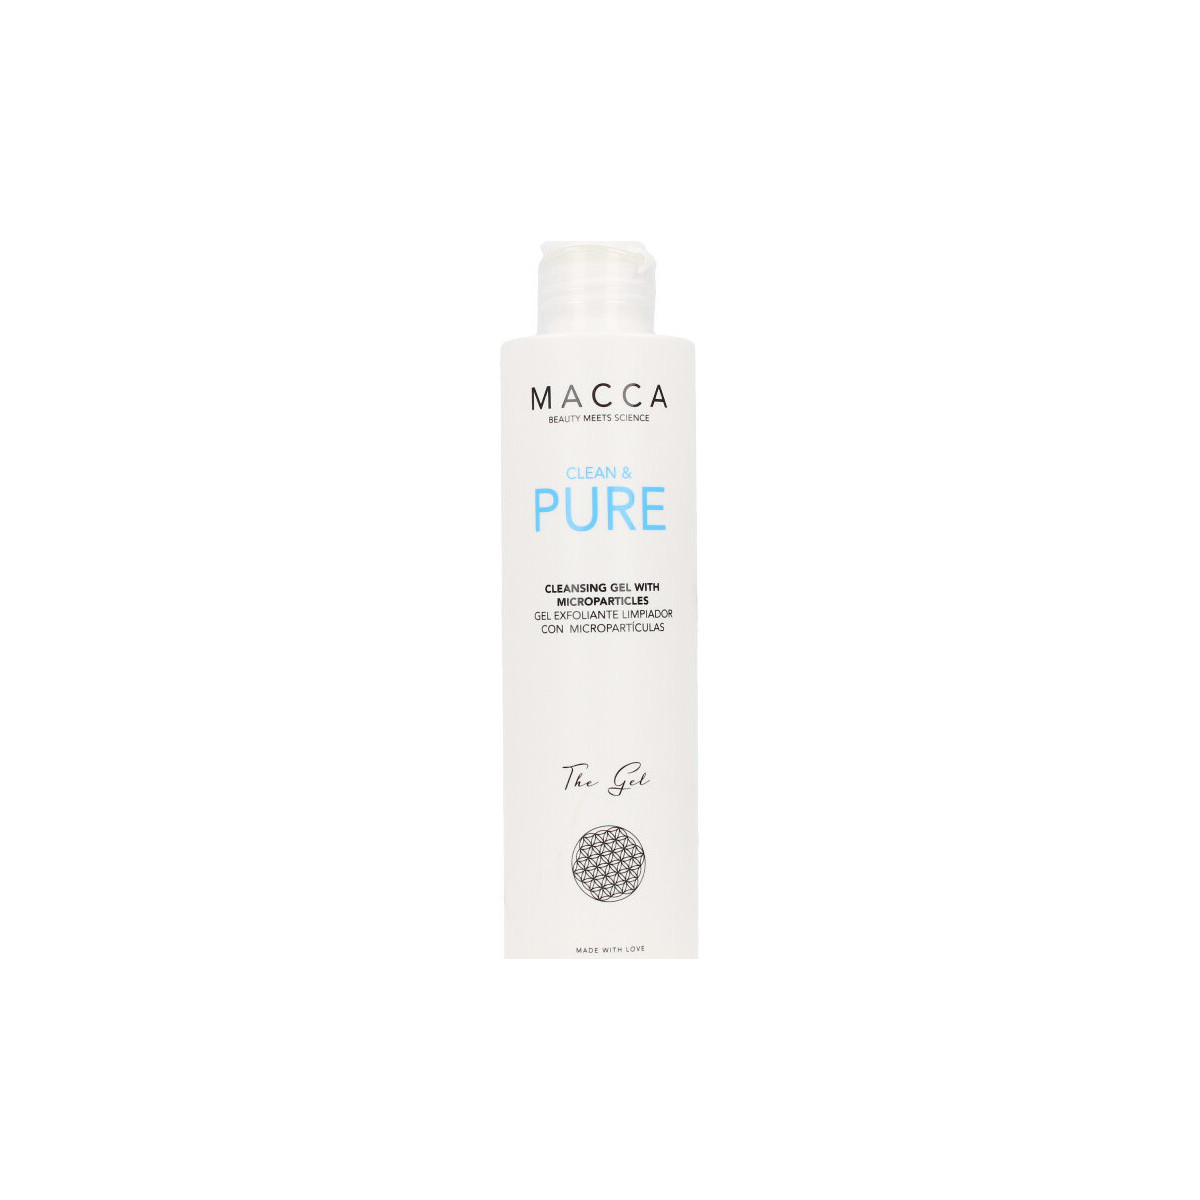 Beauty Gesichtsreiniger  Macca Clean & Pure Cleansing Gel With Microparticles 